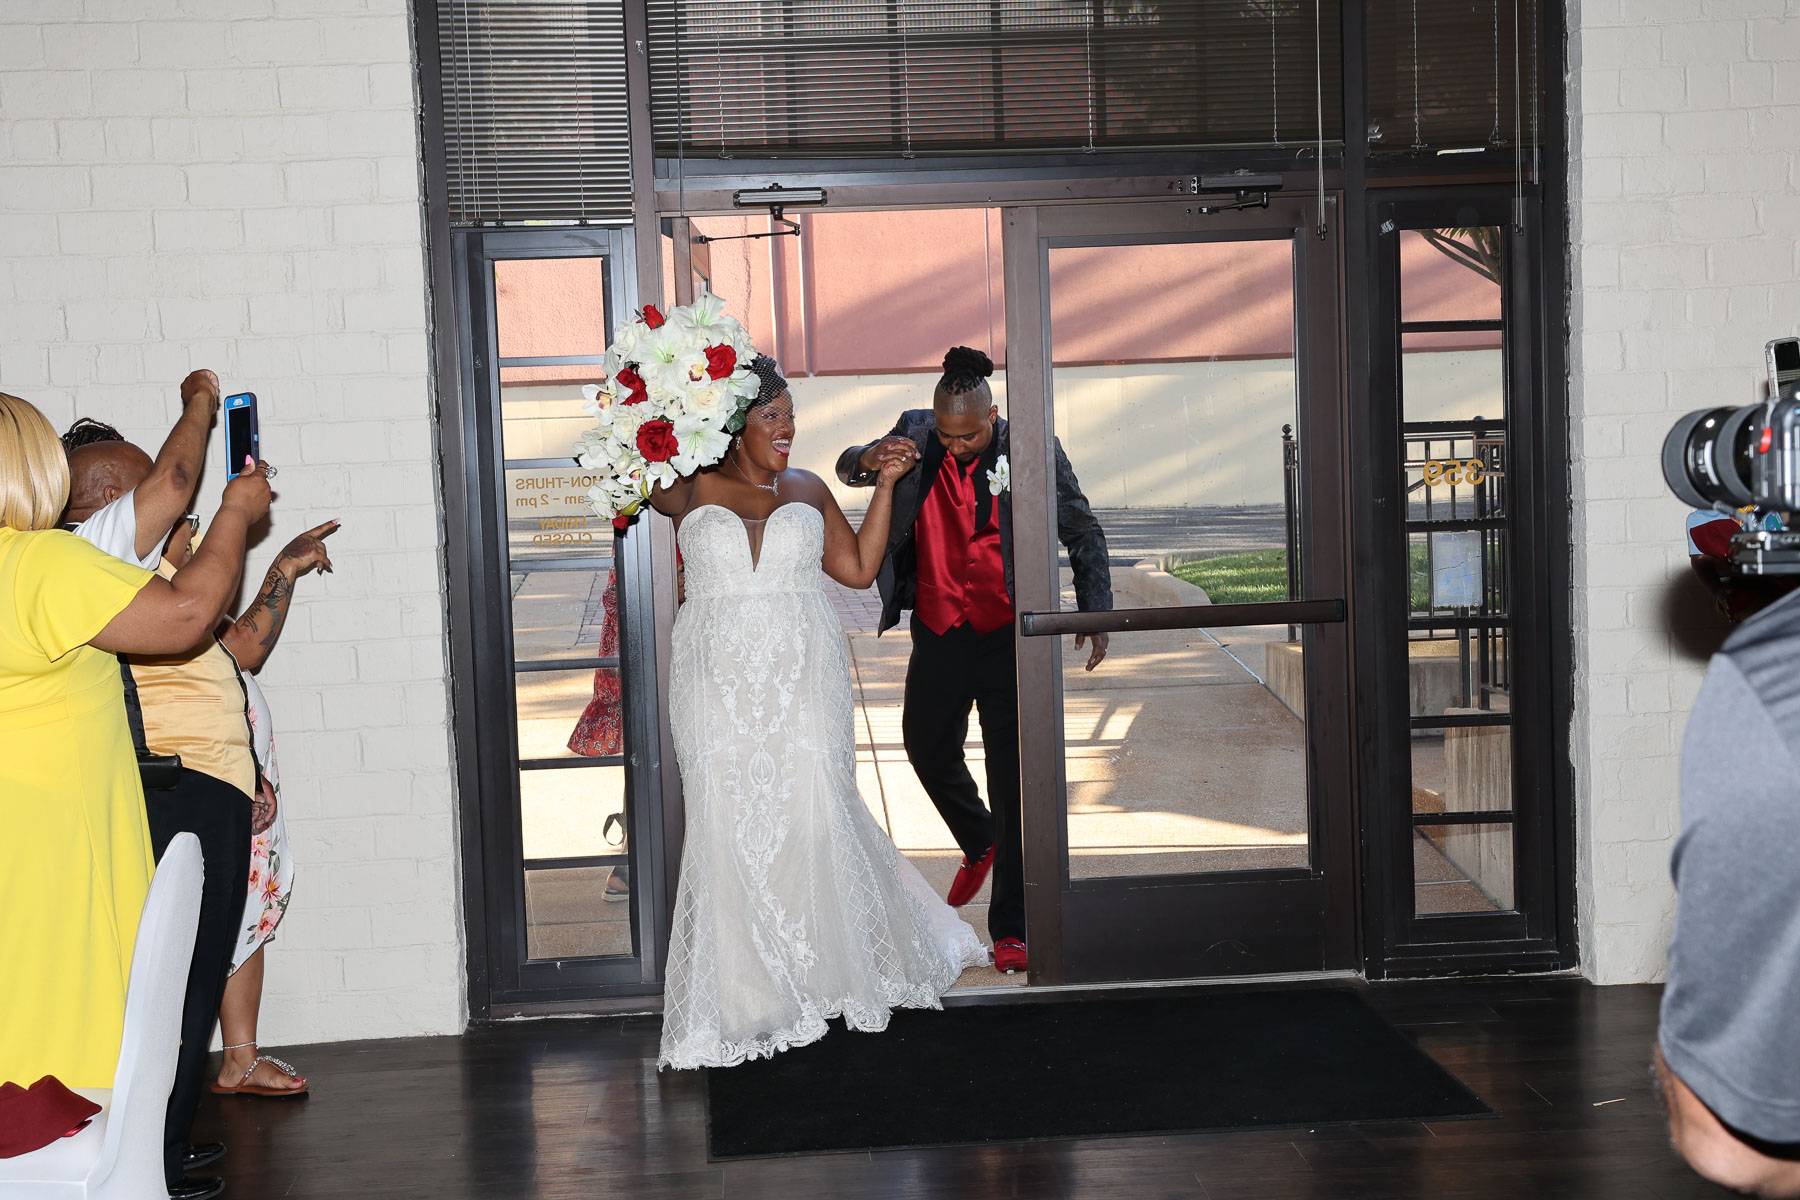 The bride and groom enter through the doors